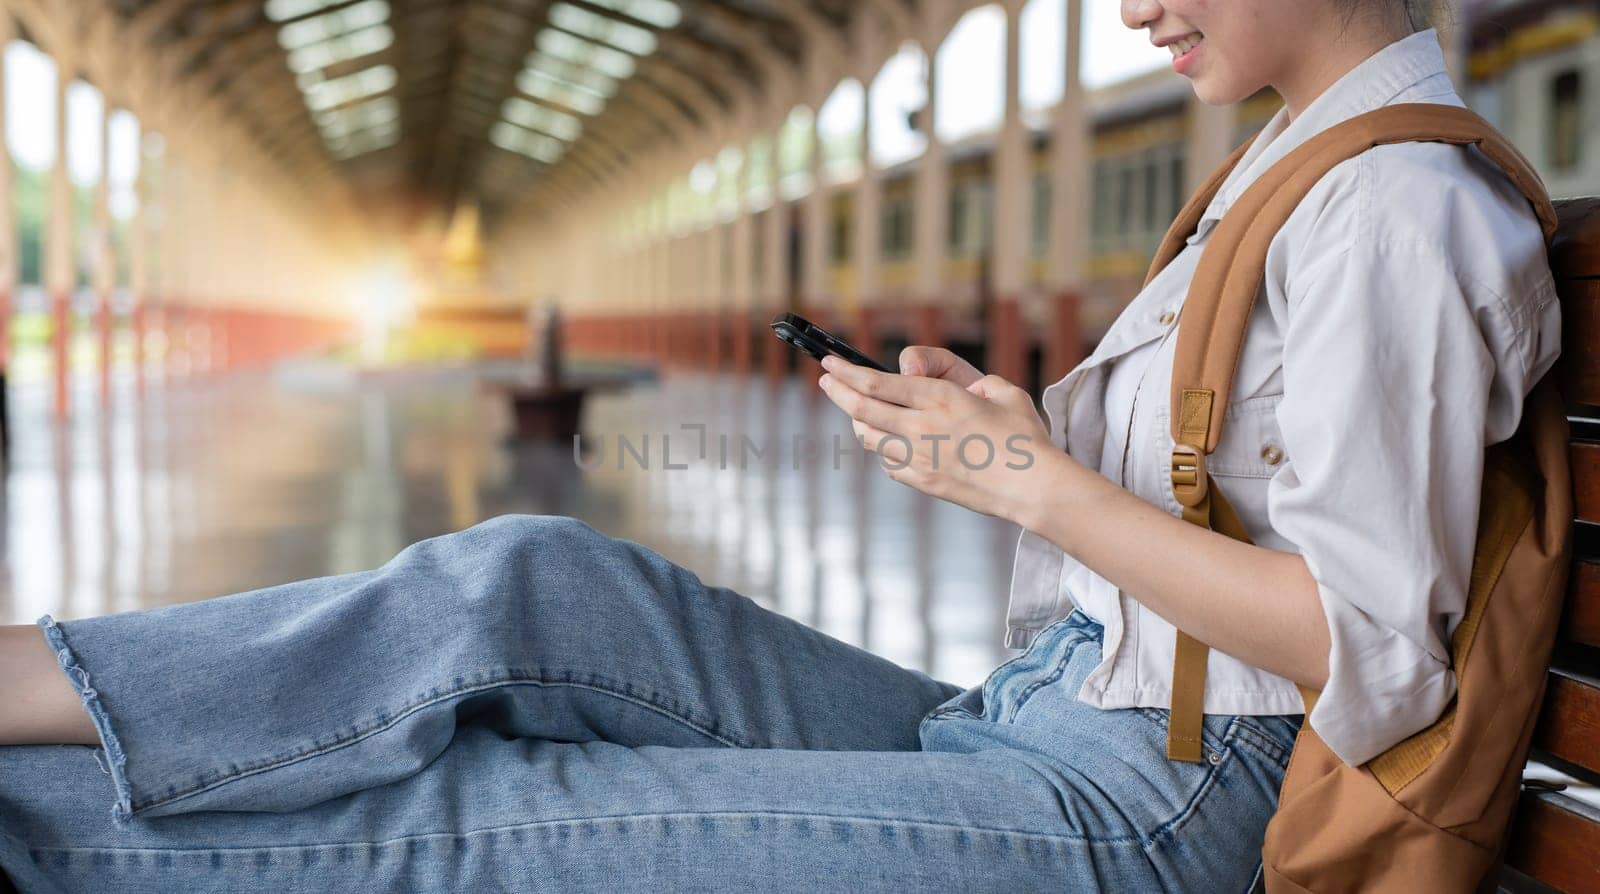 Young woman with backpack checking social media on phone waiting for train at train station to travel by wichayada